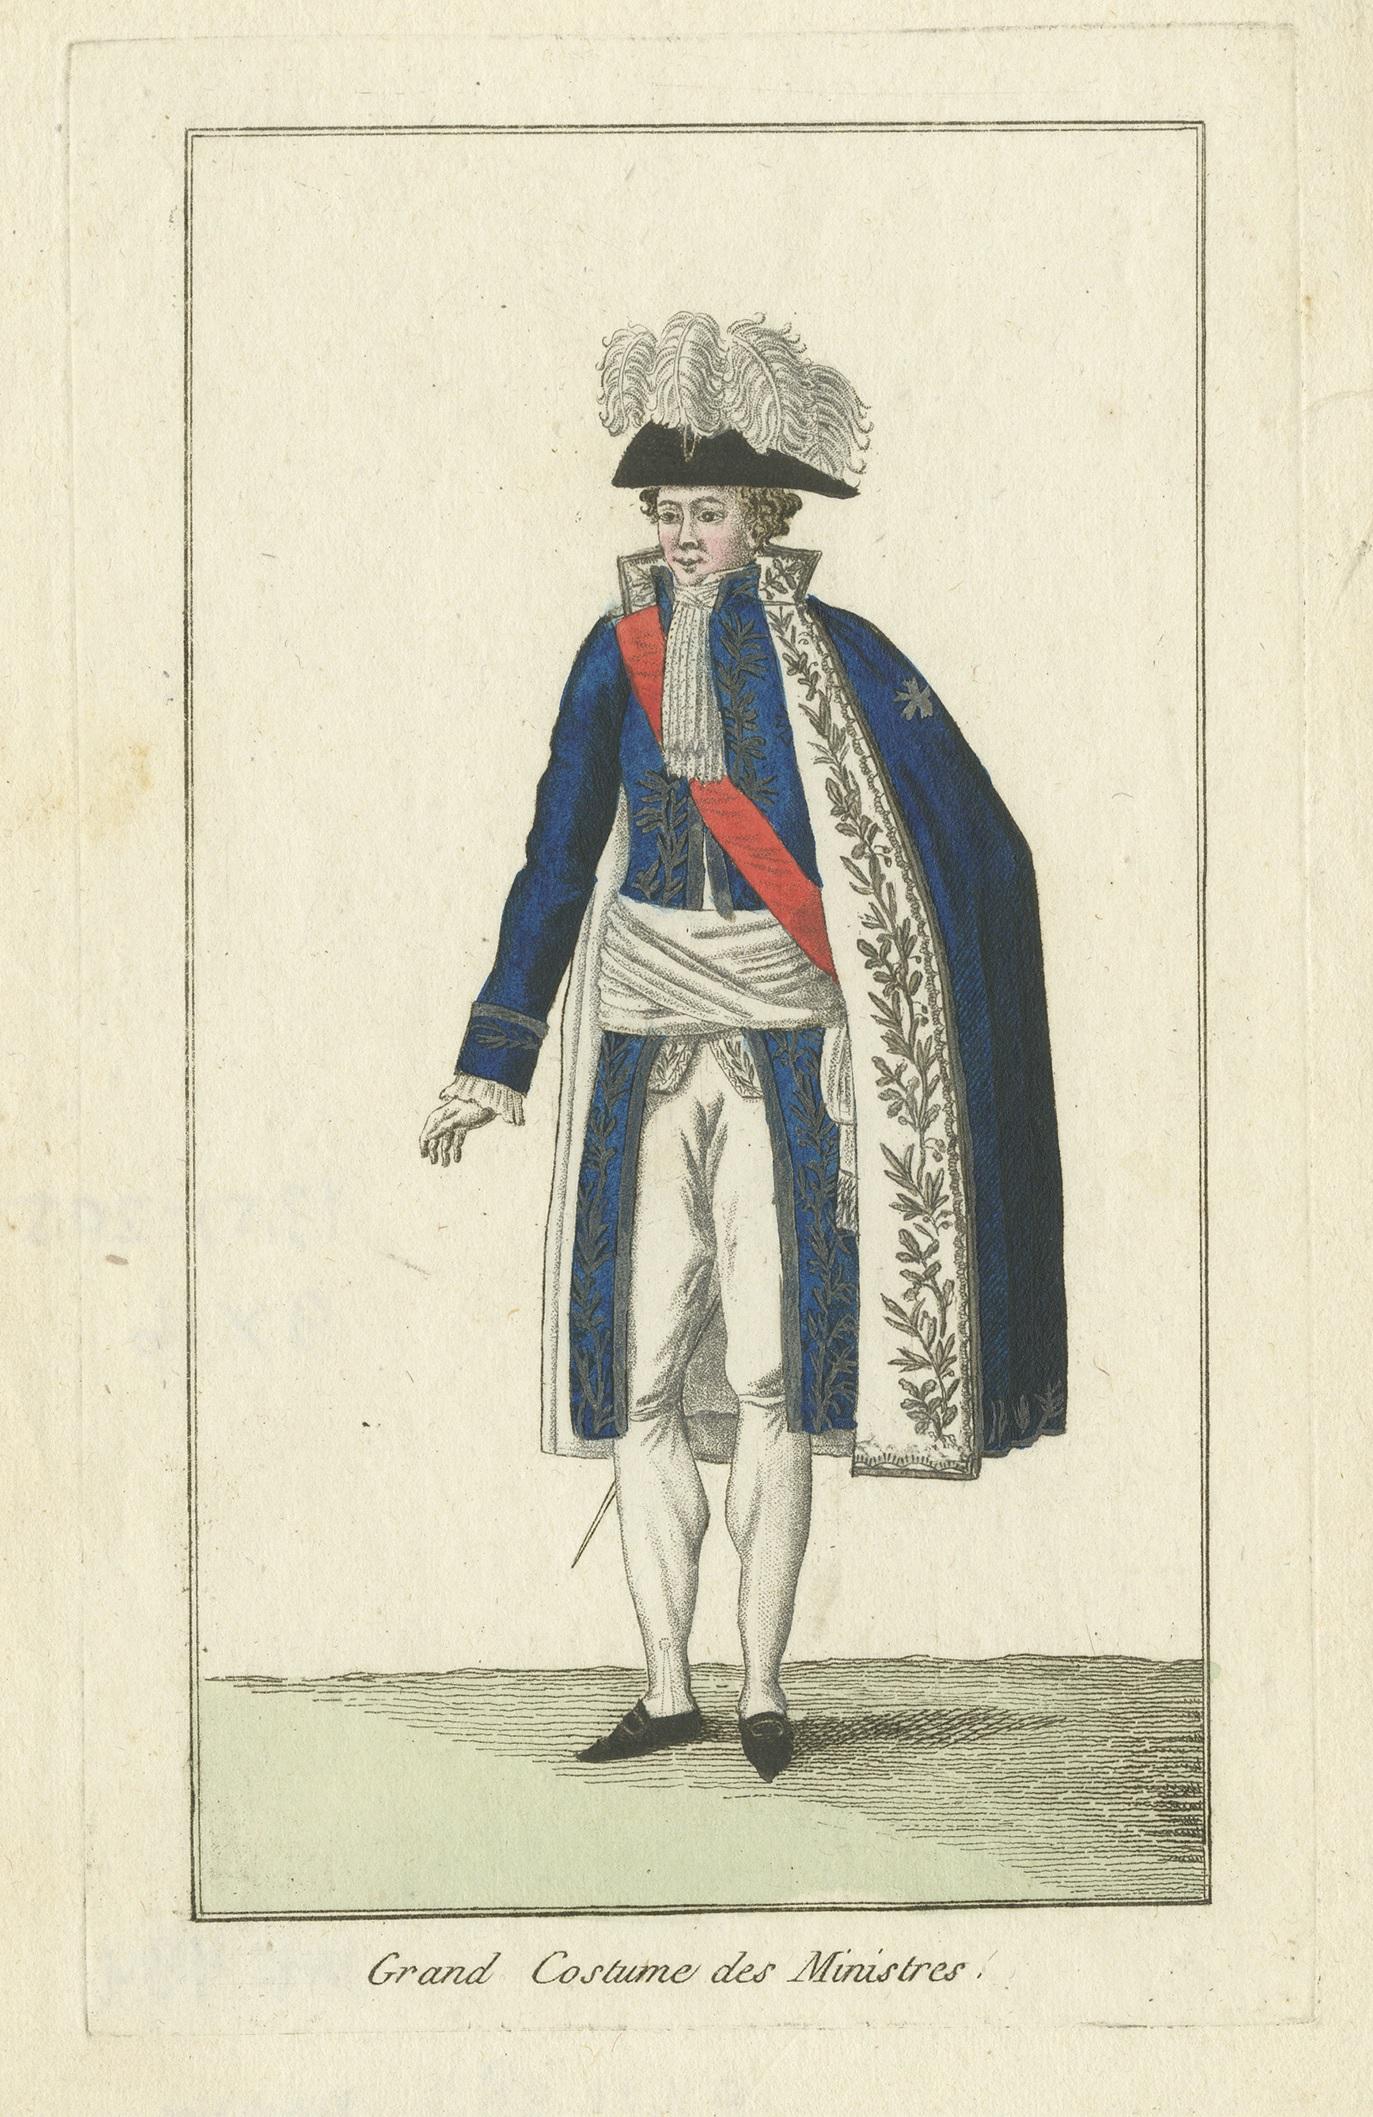 Antique print titled 'Grand Costume des Ministres'. Costume print of a French minister. This print originates from a small booklet with engravings of French costumes.